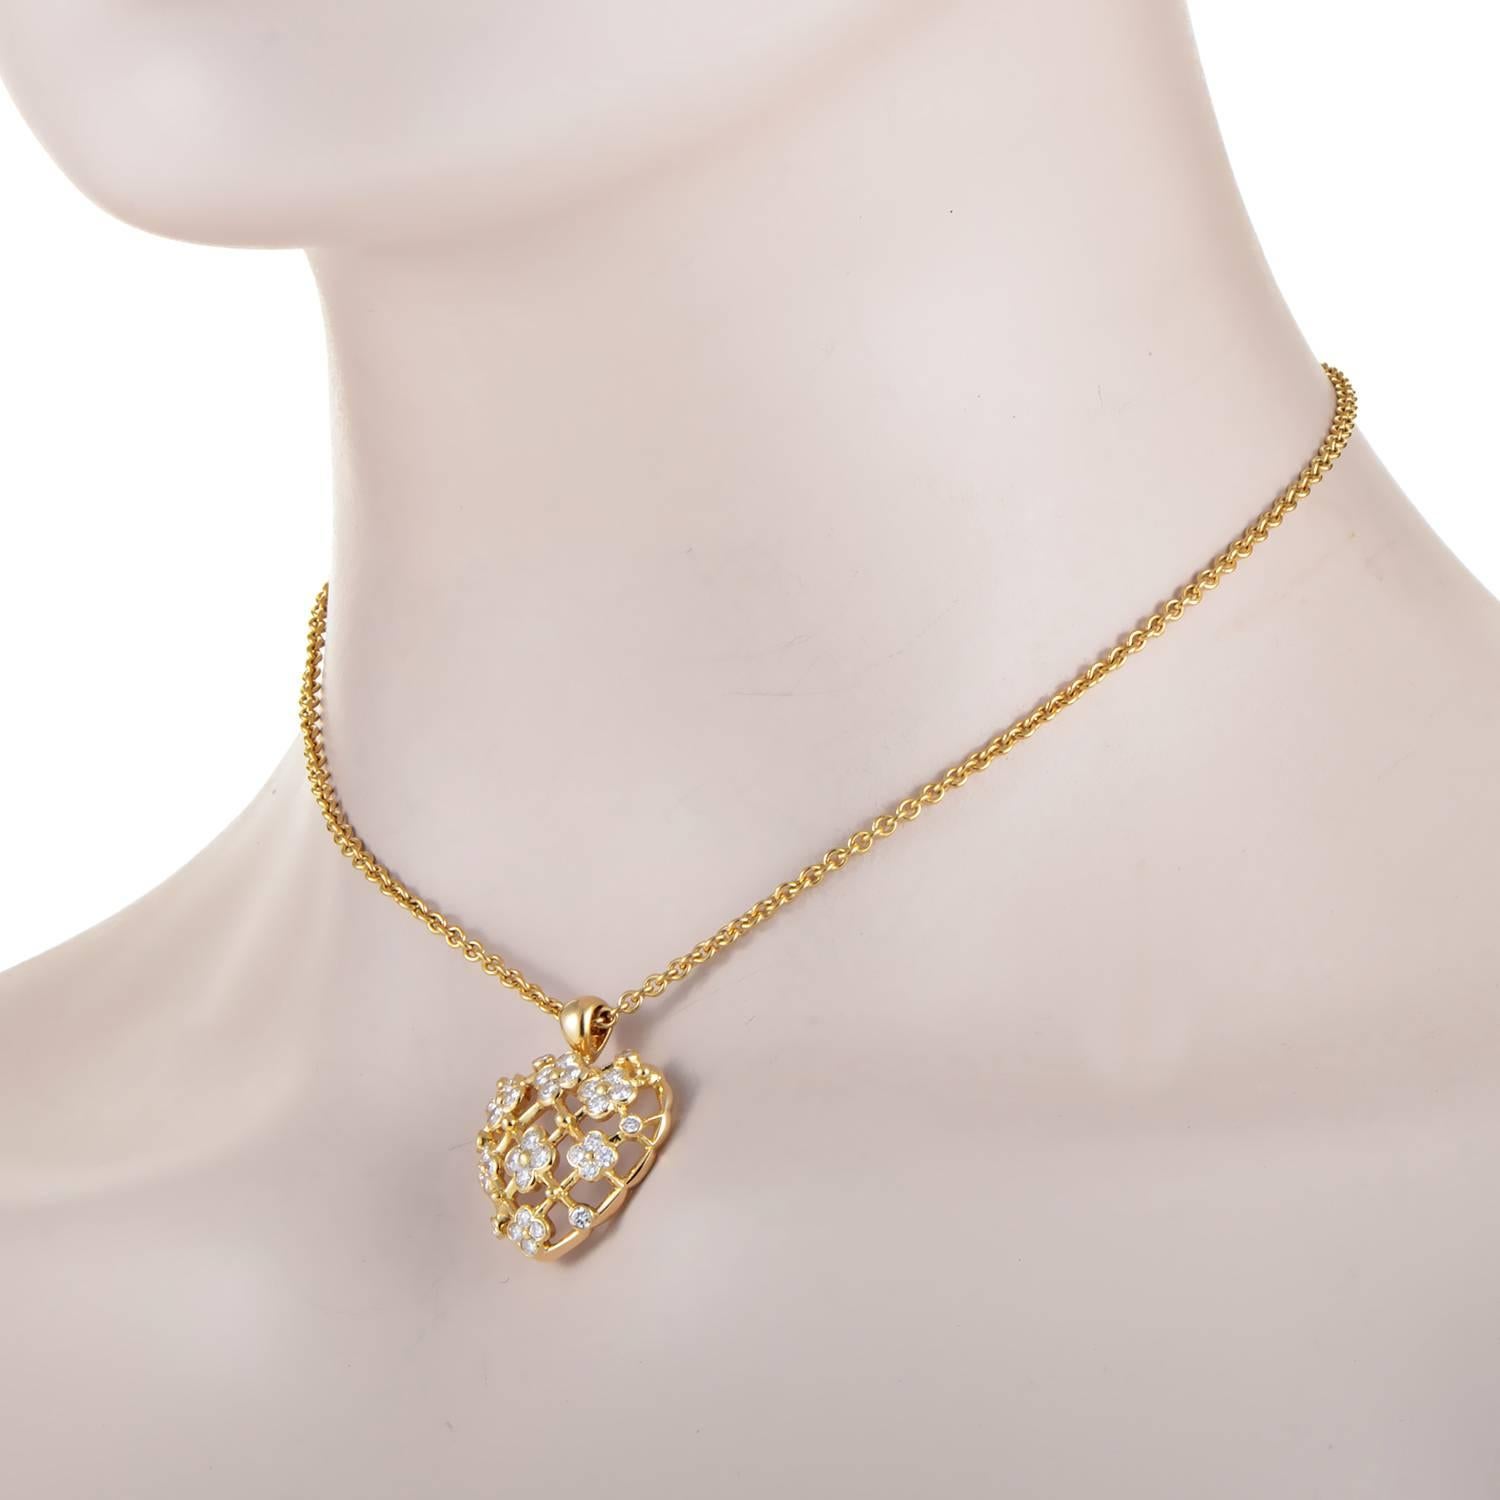 Loving sentiment bursts with floral finesse in this pendant choker necklace from Van Cleef & Arpels. The chain drops in a ripple of 18K Yellow Gold, and is anchored by the blossoming heart at the end of it. The heart motif is comprised of flowers